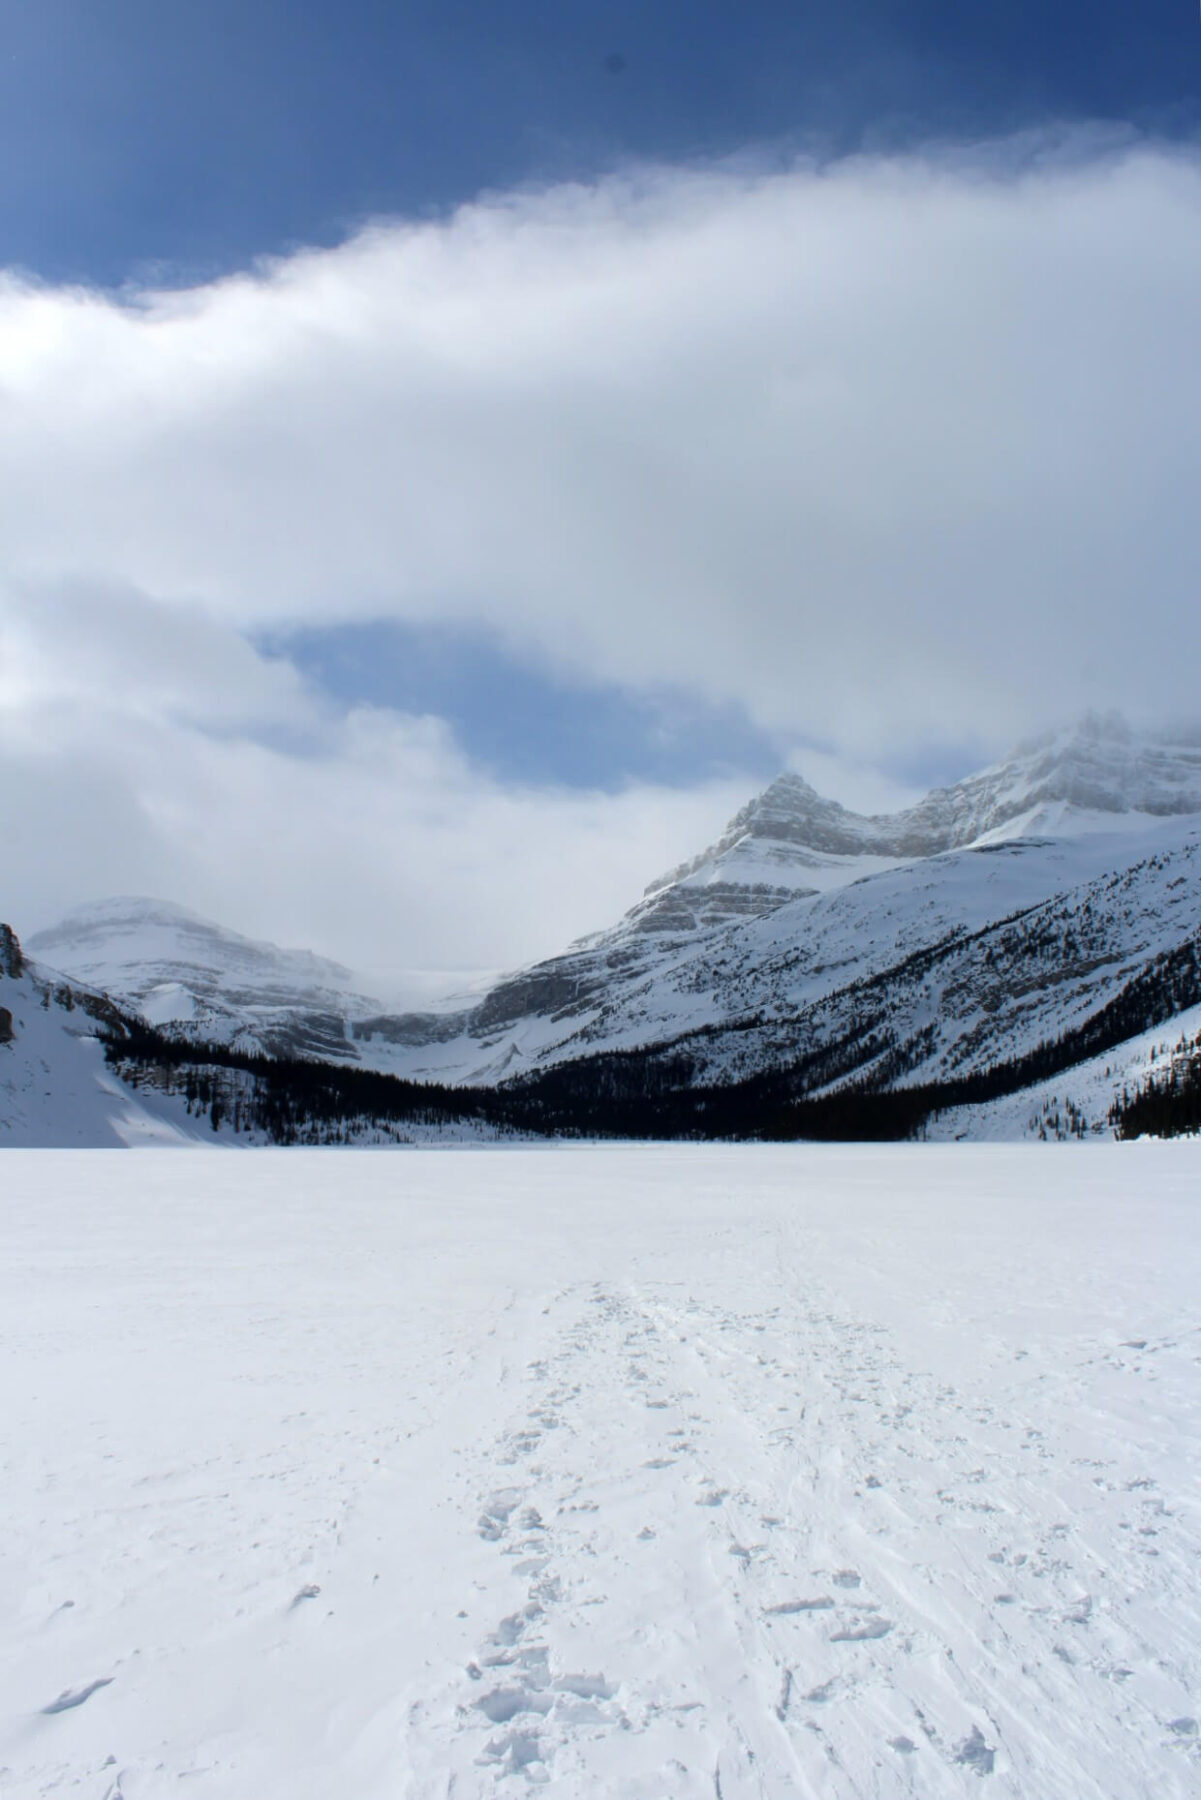 Looking across the frozen expanse of Bow Lake, with snow capped mountains lining the edge